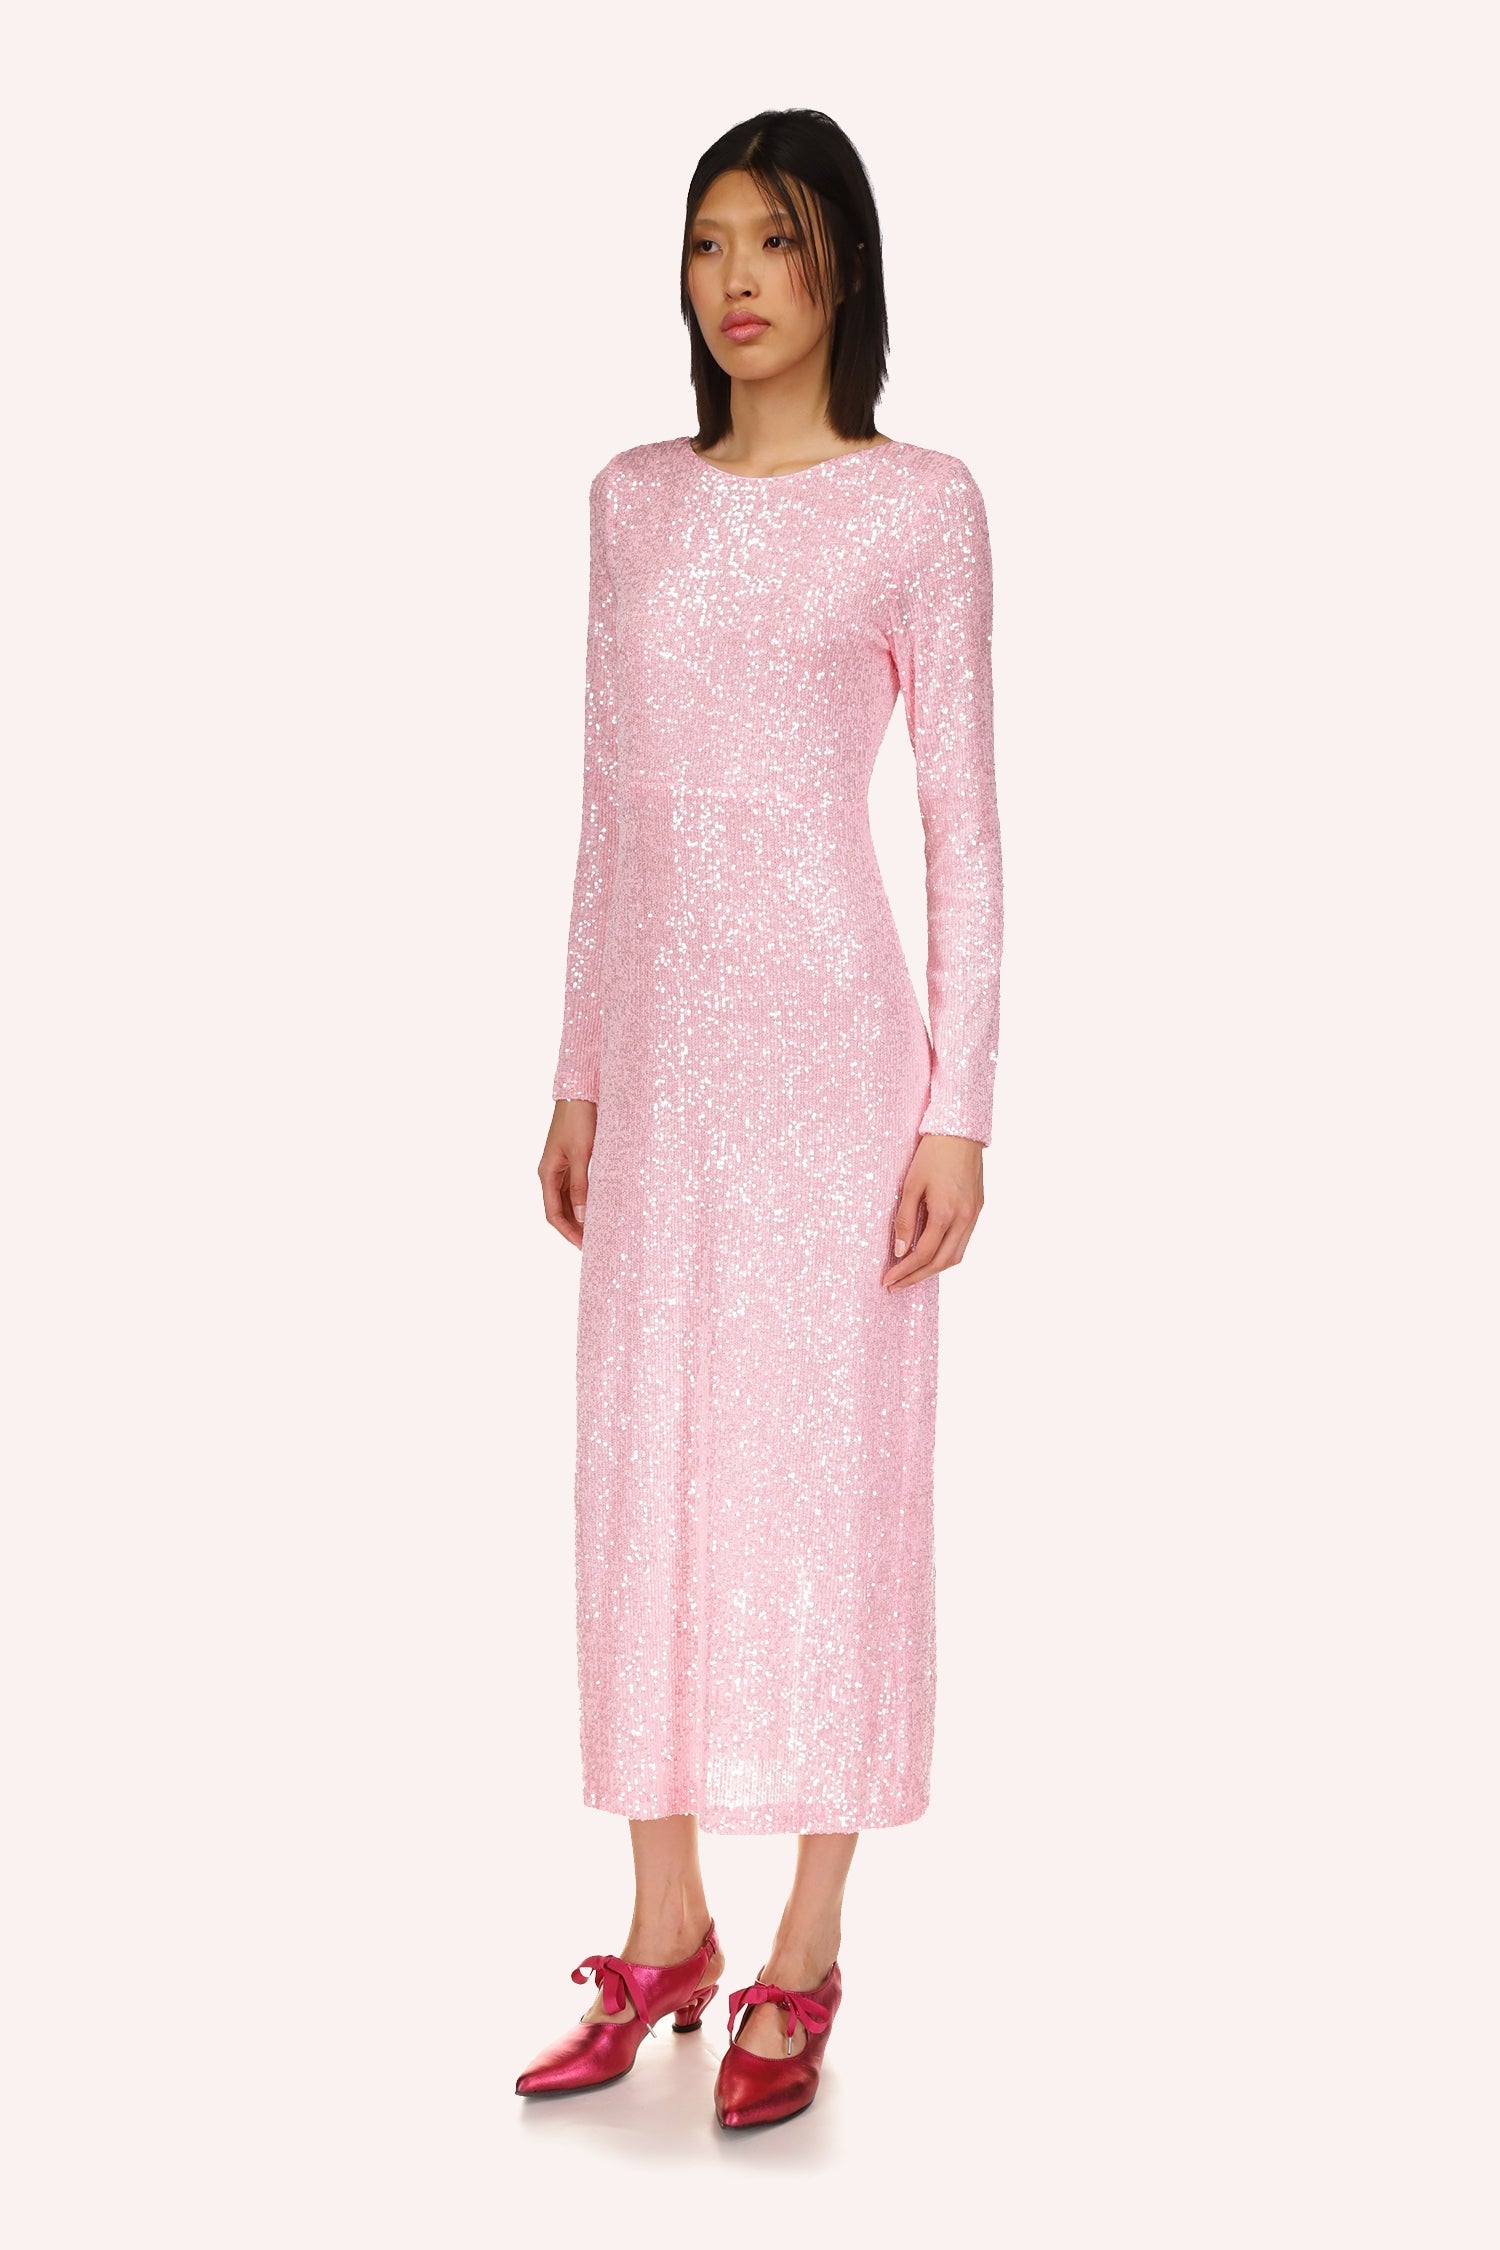 Sequin Mesh mid-calf long designed by Anna Sui, is a sophisticated gown in a soft baby pink color